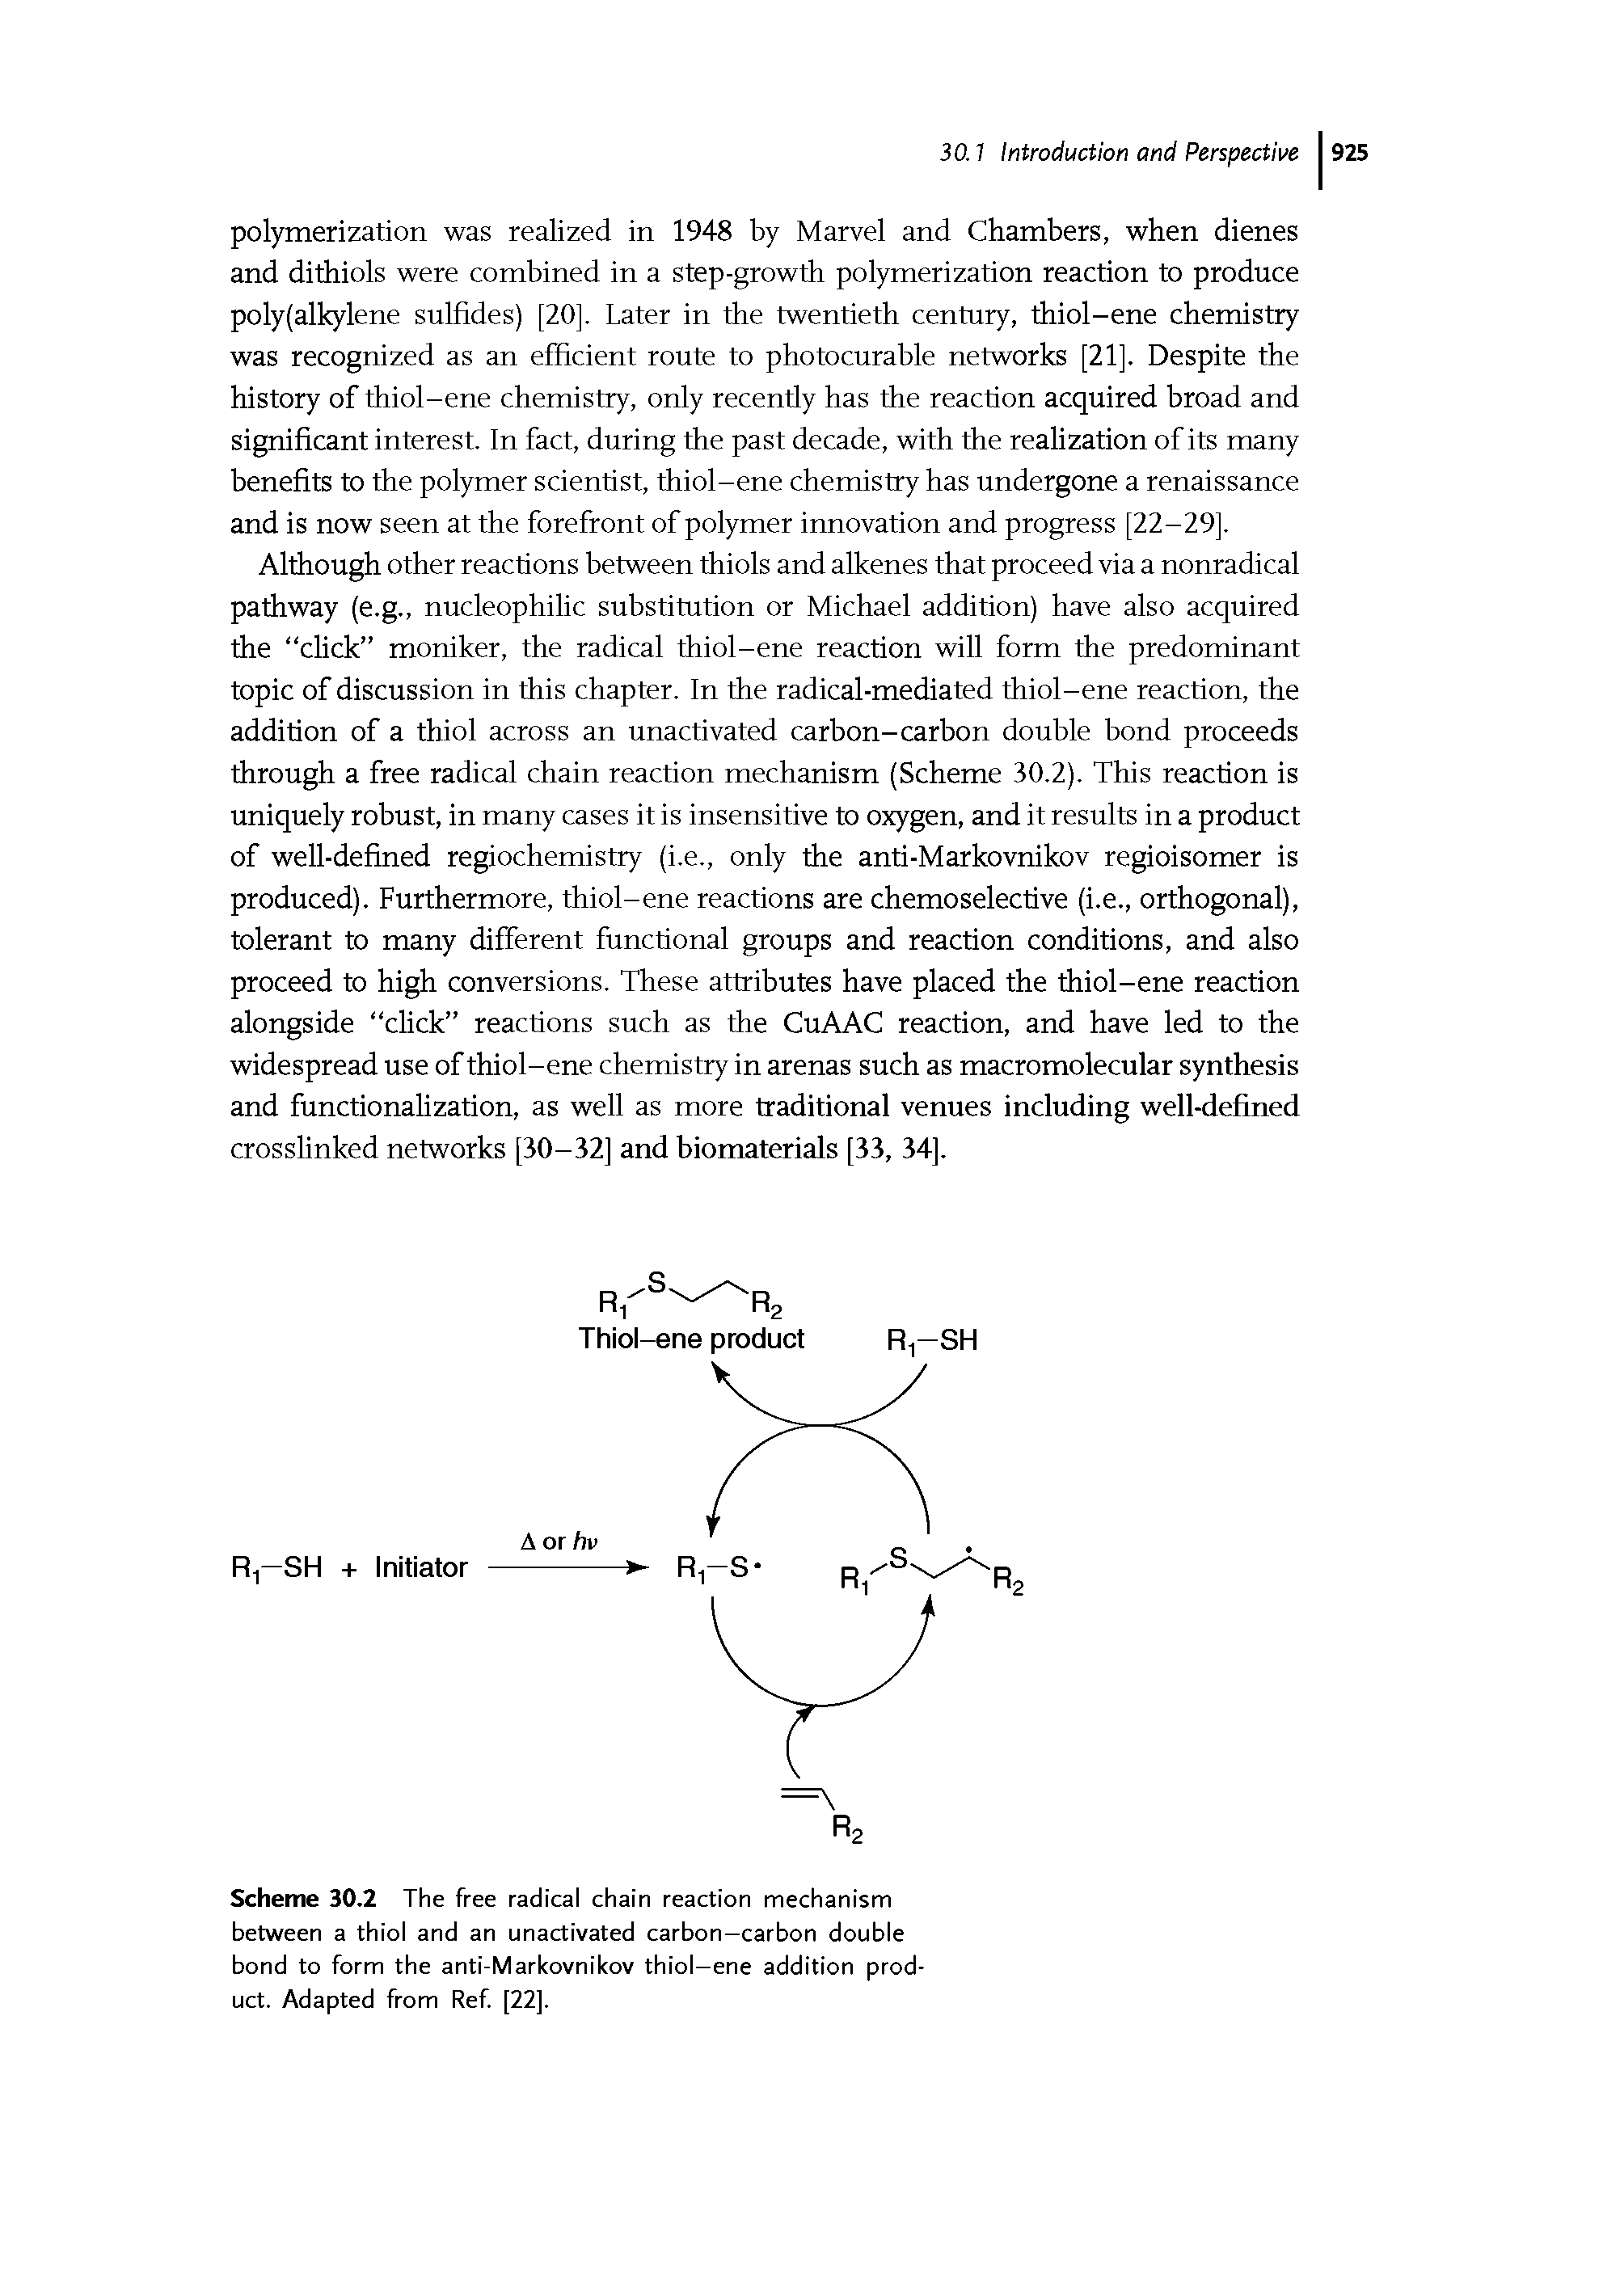 Scheme 30.2 The free radical chain reaction mechanism between a thiol and an unactivated carbon-carbon double bond to form the anti-Markovnikov thiol-ene addition product. Adapted from Ref [22].